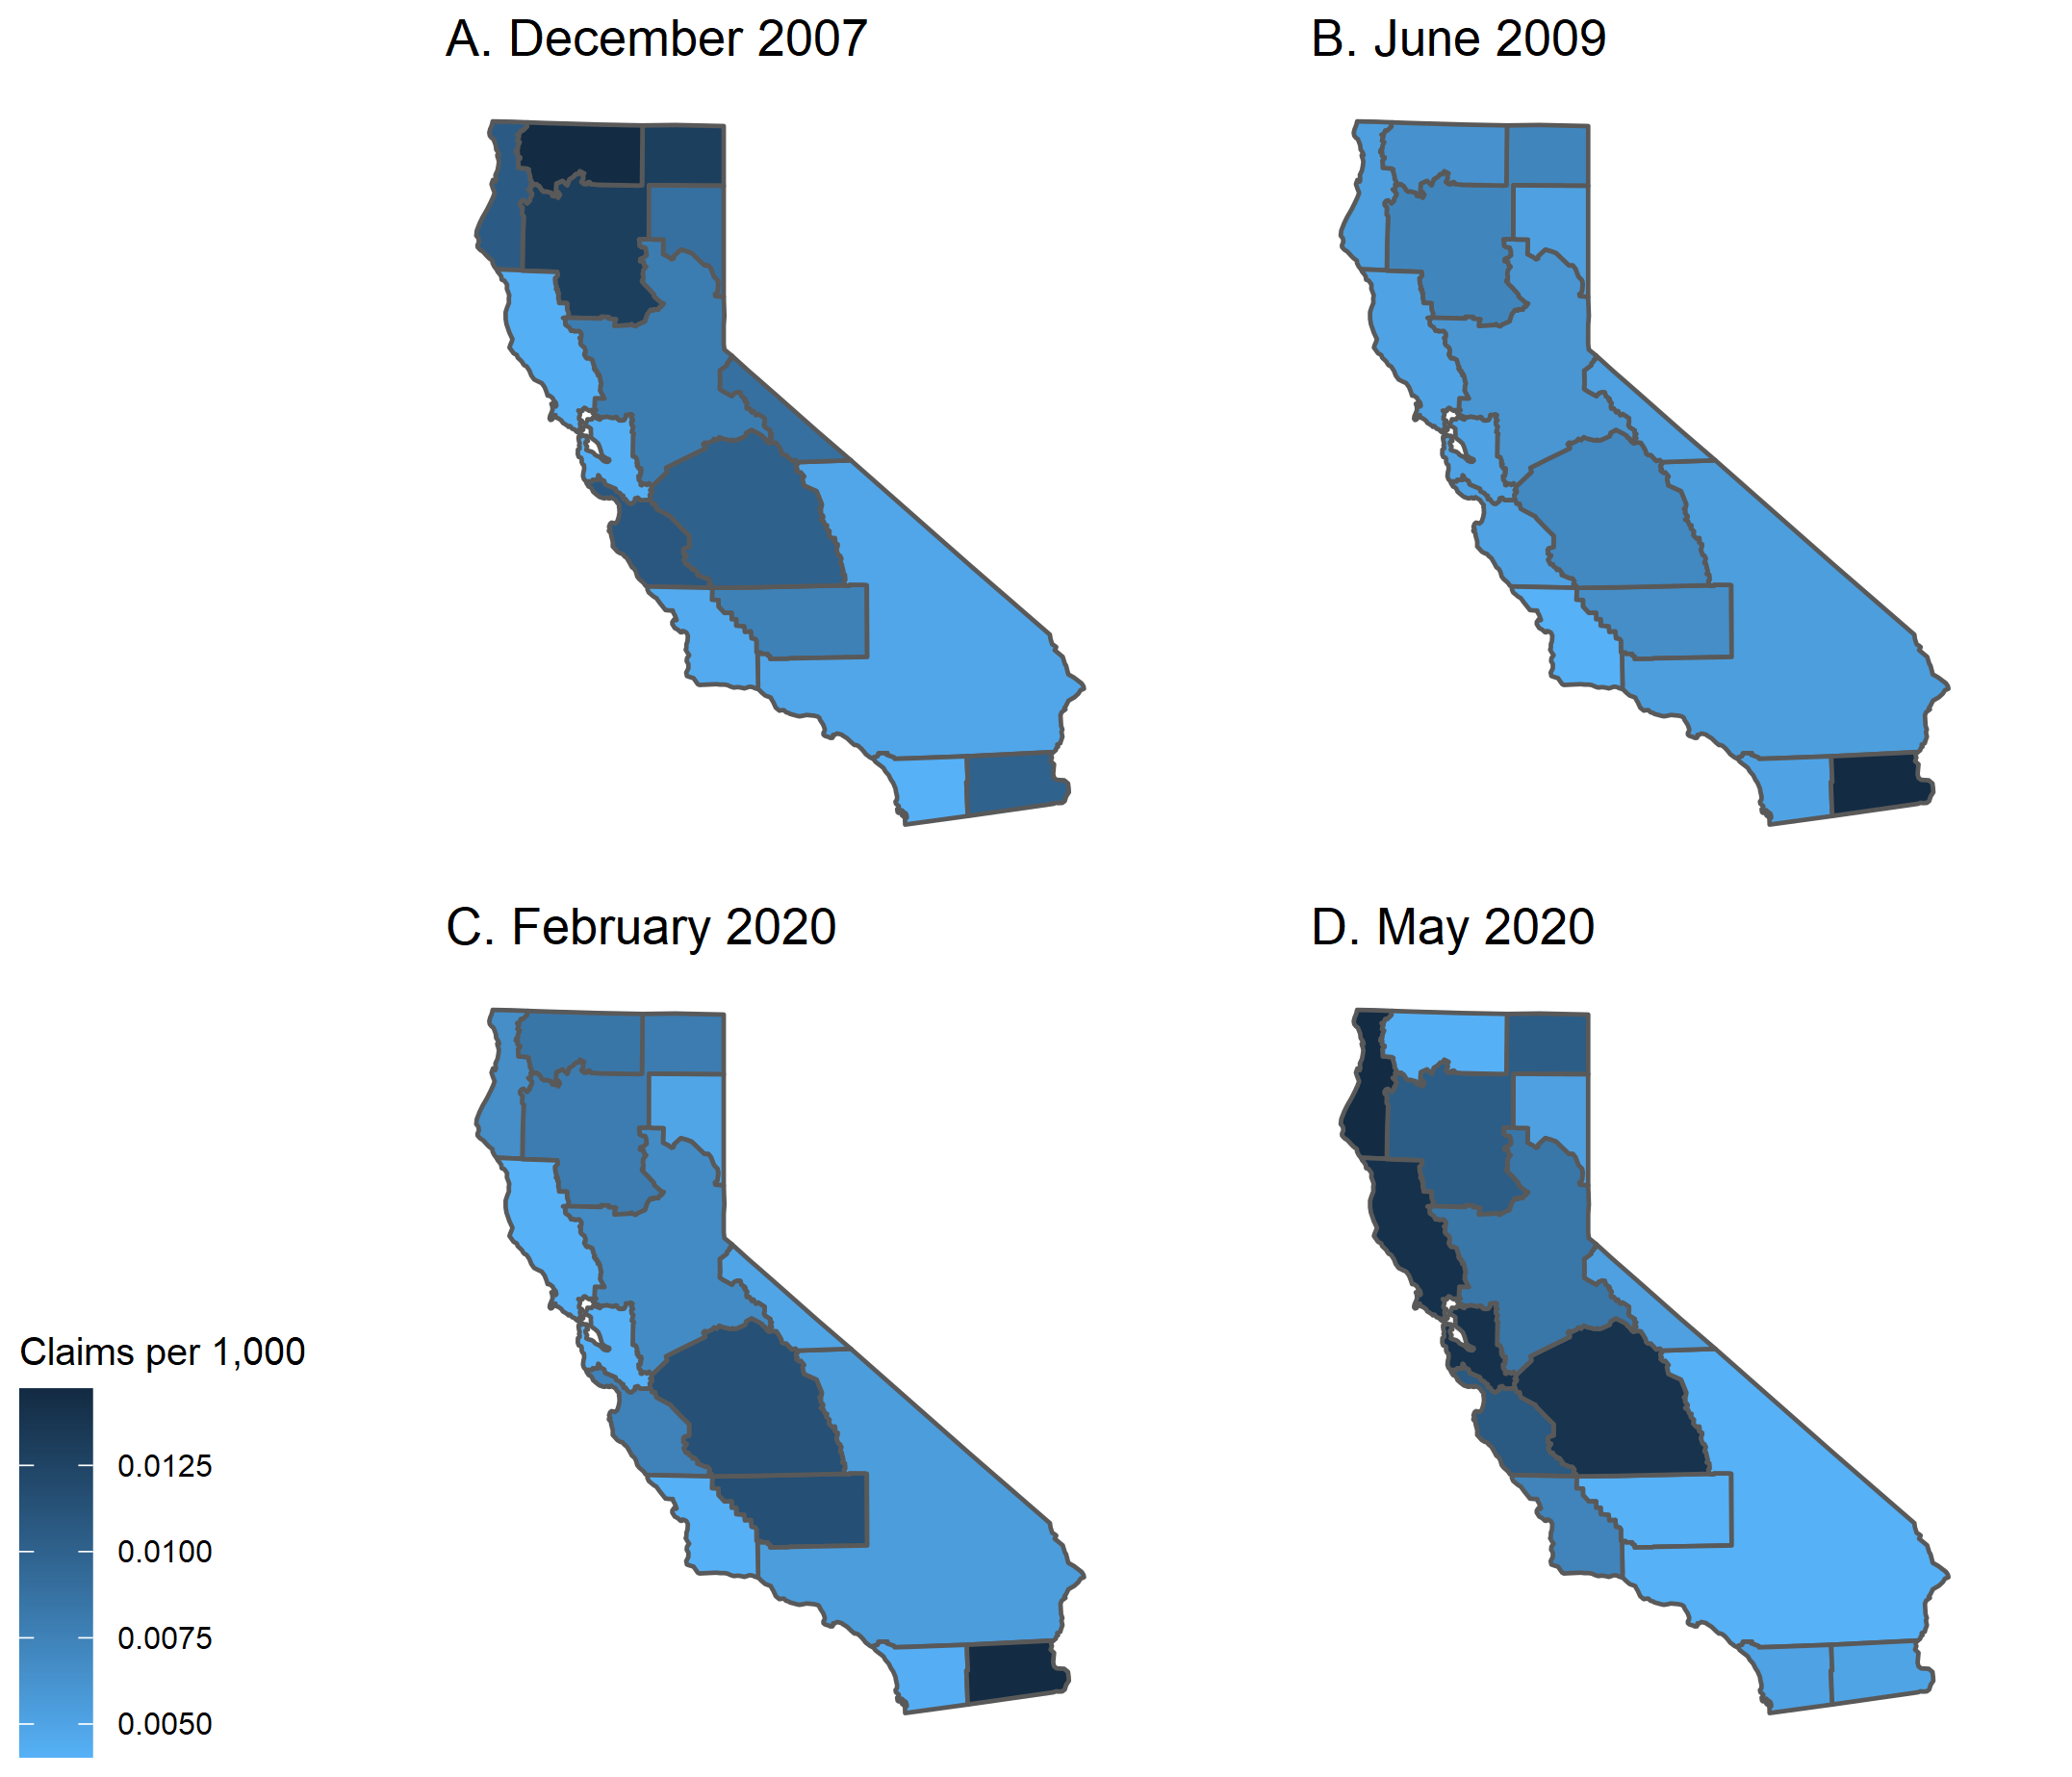 Figure 1 shows heat maps for the level of initial unemployment insurance claims per 1,000 residents for metro areas within California for the months corresponding to the start and end of the 2007–09 recession and the start of the current recession and May 2020. There is a large degree of heterogeneity across metro areas—both across and within the two different recessions.